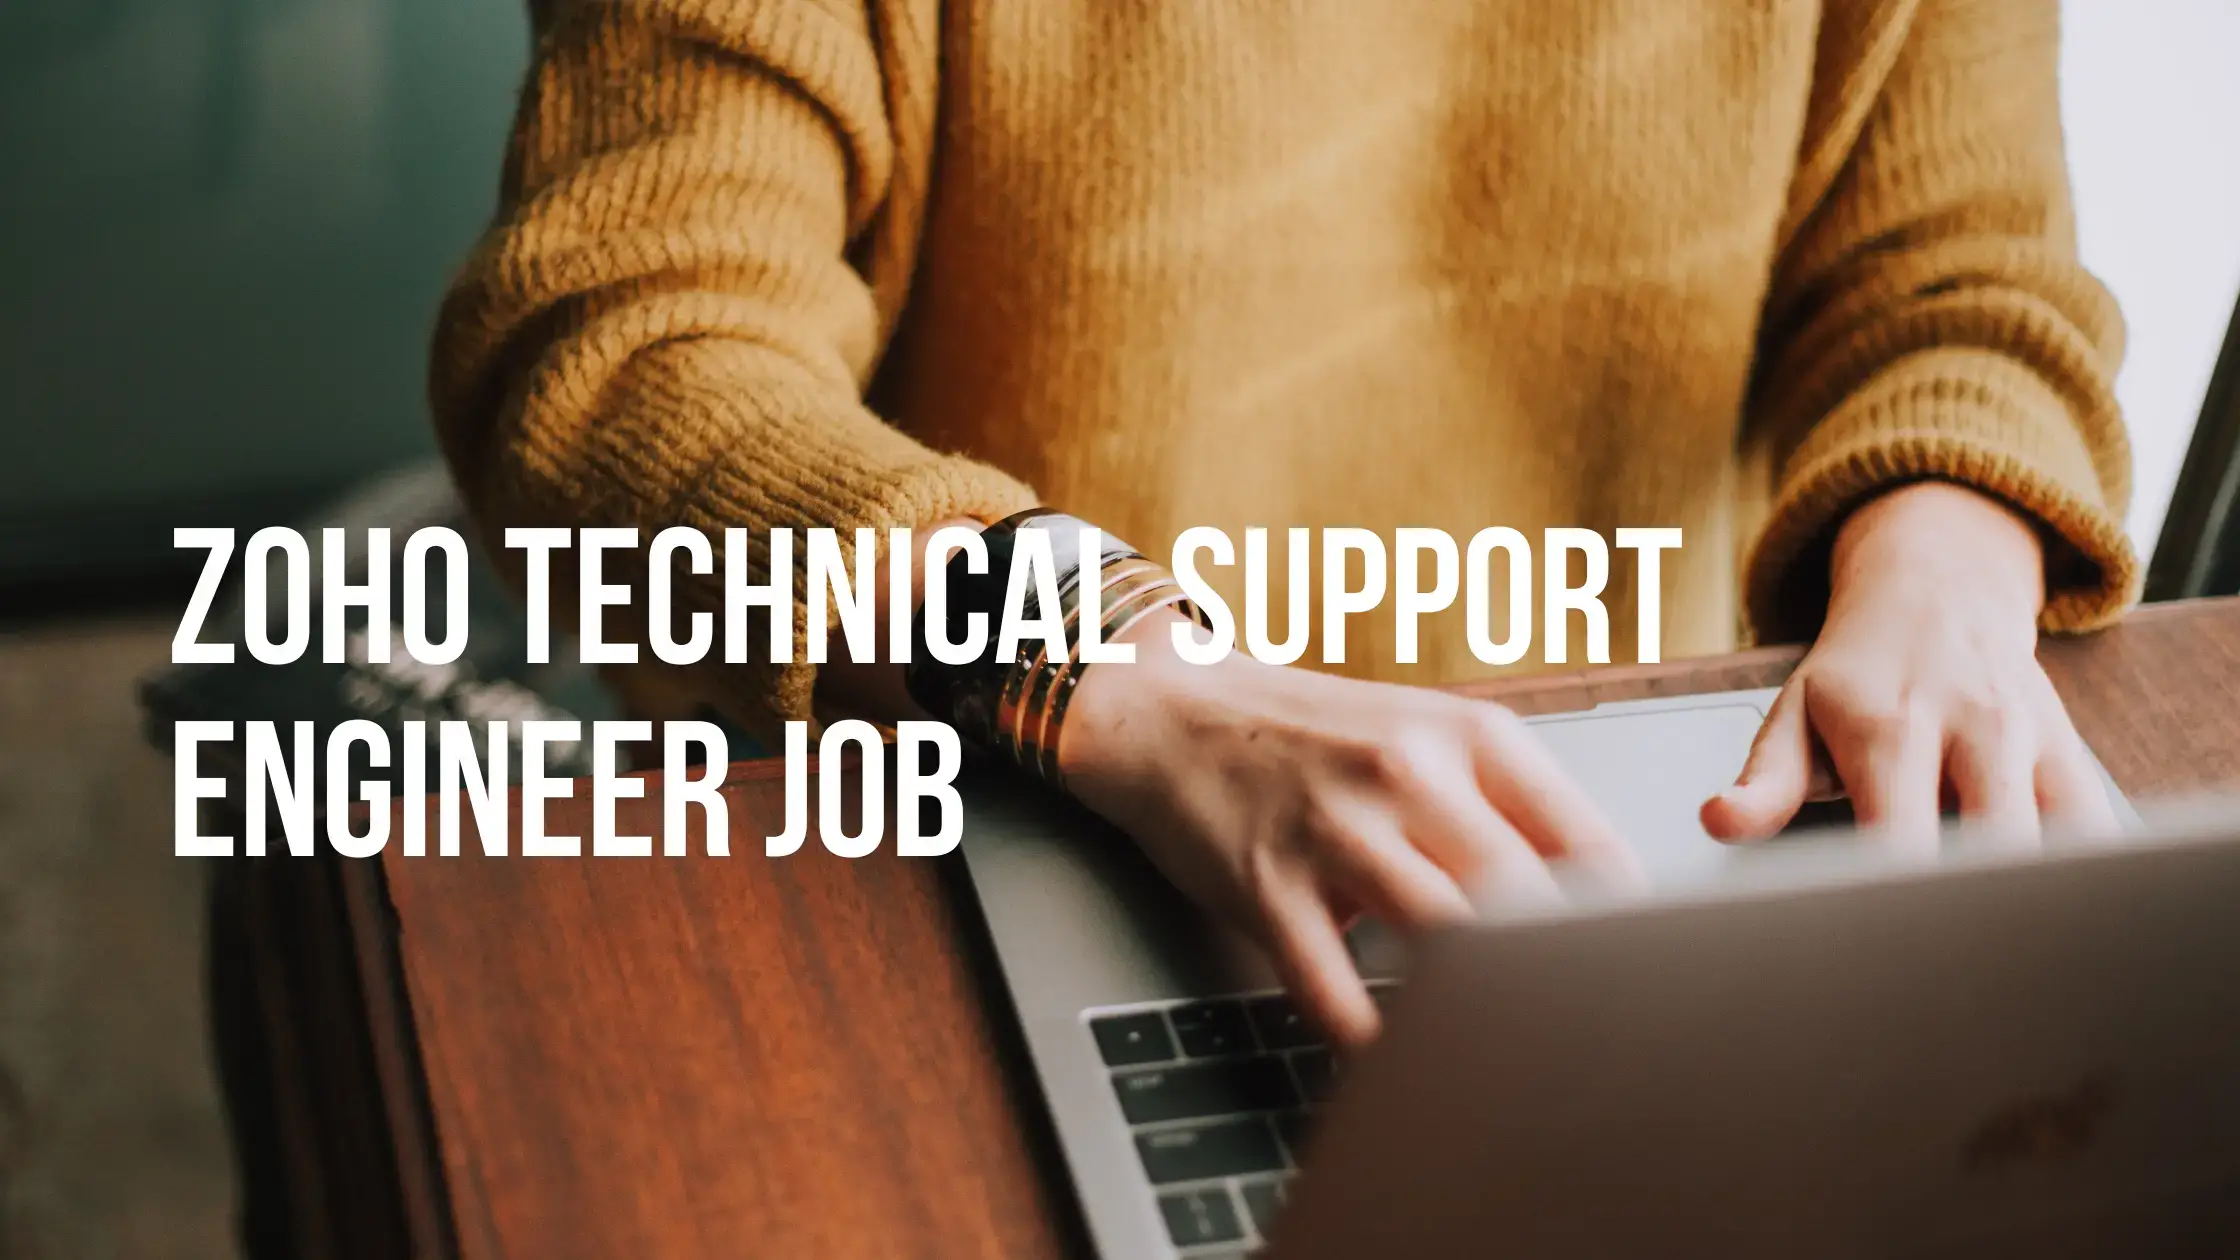 Zoho Technical Support Engineer Job 2023 - Apply Now for a Rewarding Career